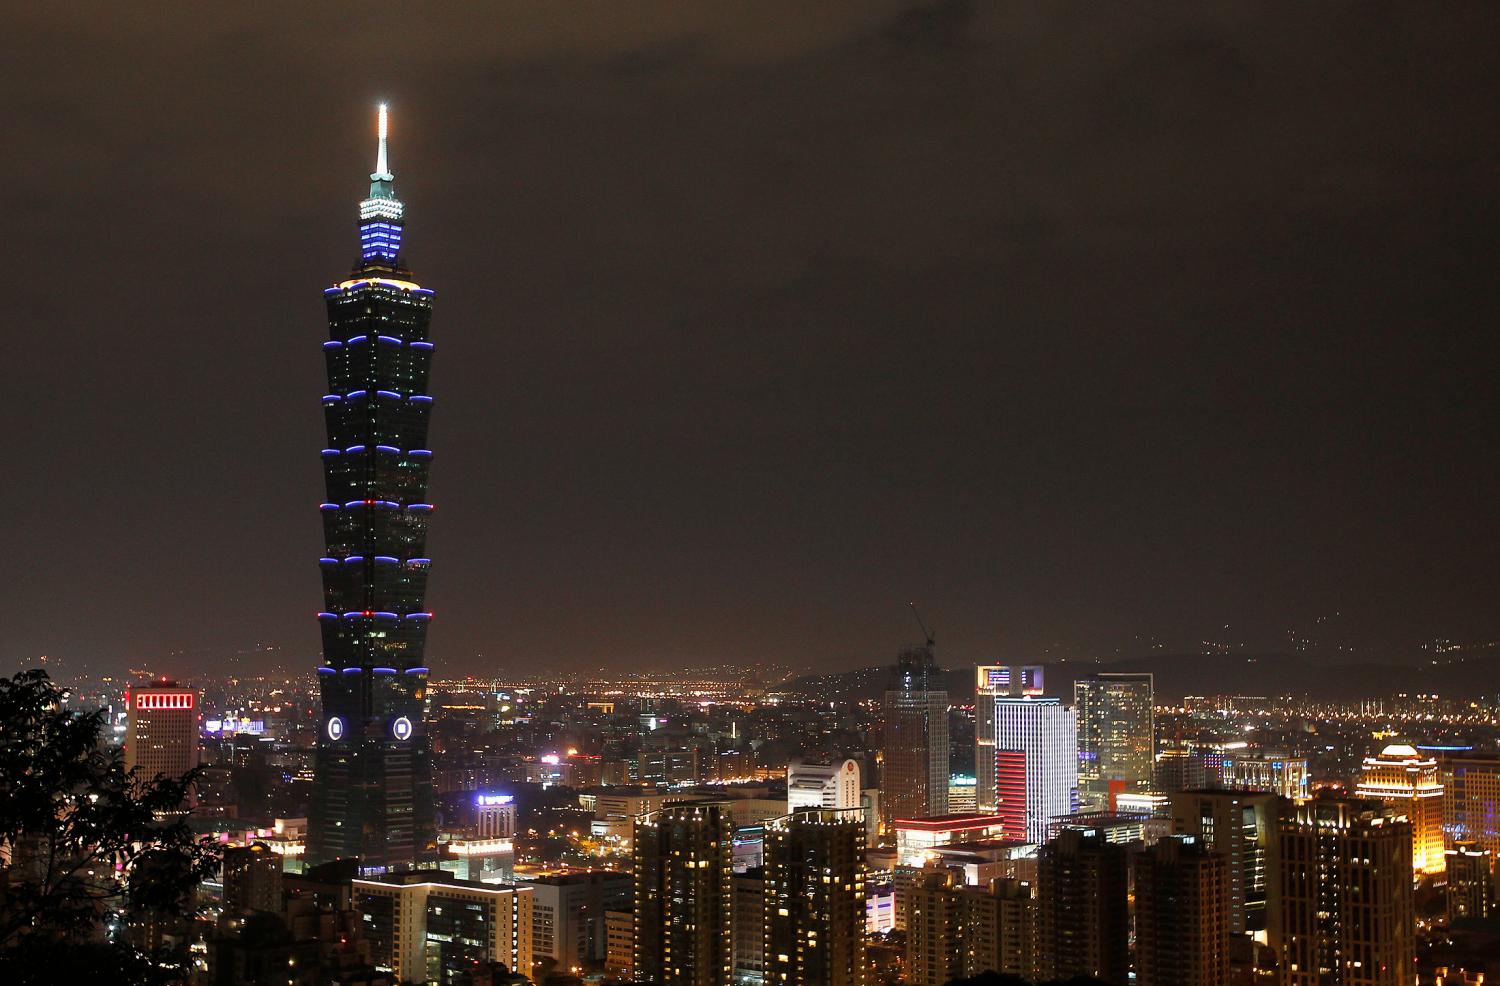 The Taipei 101 building is seen before Earth Hour in Taipei March 31, 2012. Earth Hour, when everyone around the world is asked to turn off lights for an hour from 8.30 p.m. local time, is meant as a show of support for tougher action to confront climate change. REUTERS/Pichi Chuang (TAIWAN - Tags: ENVIRONMENT CITYSPACE) - GM1E83V1OM401